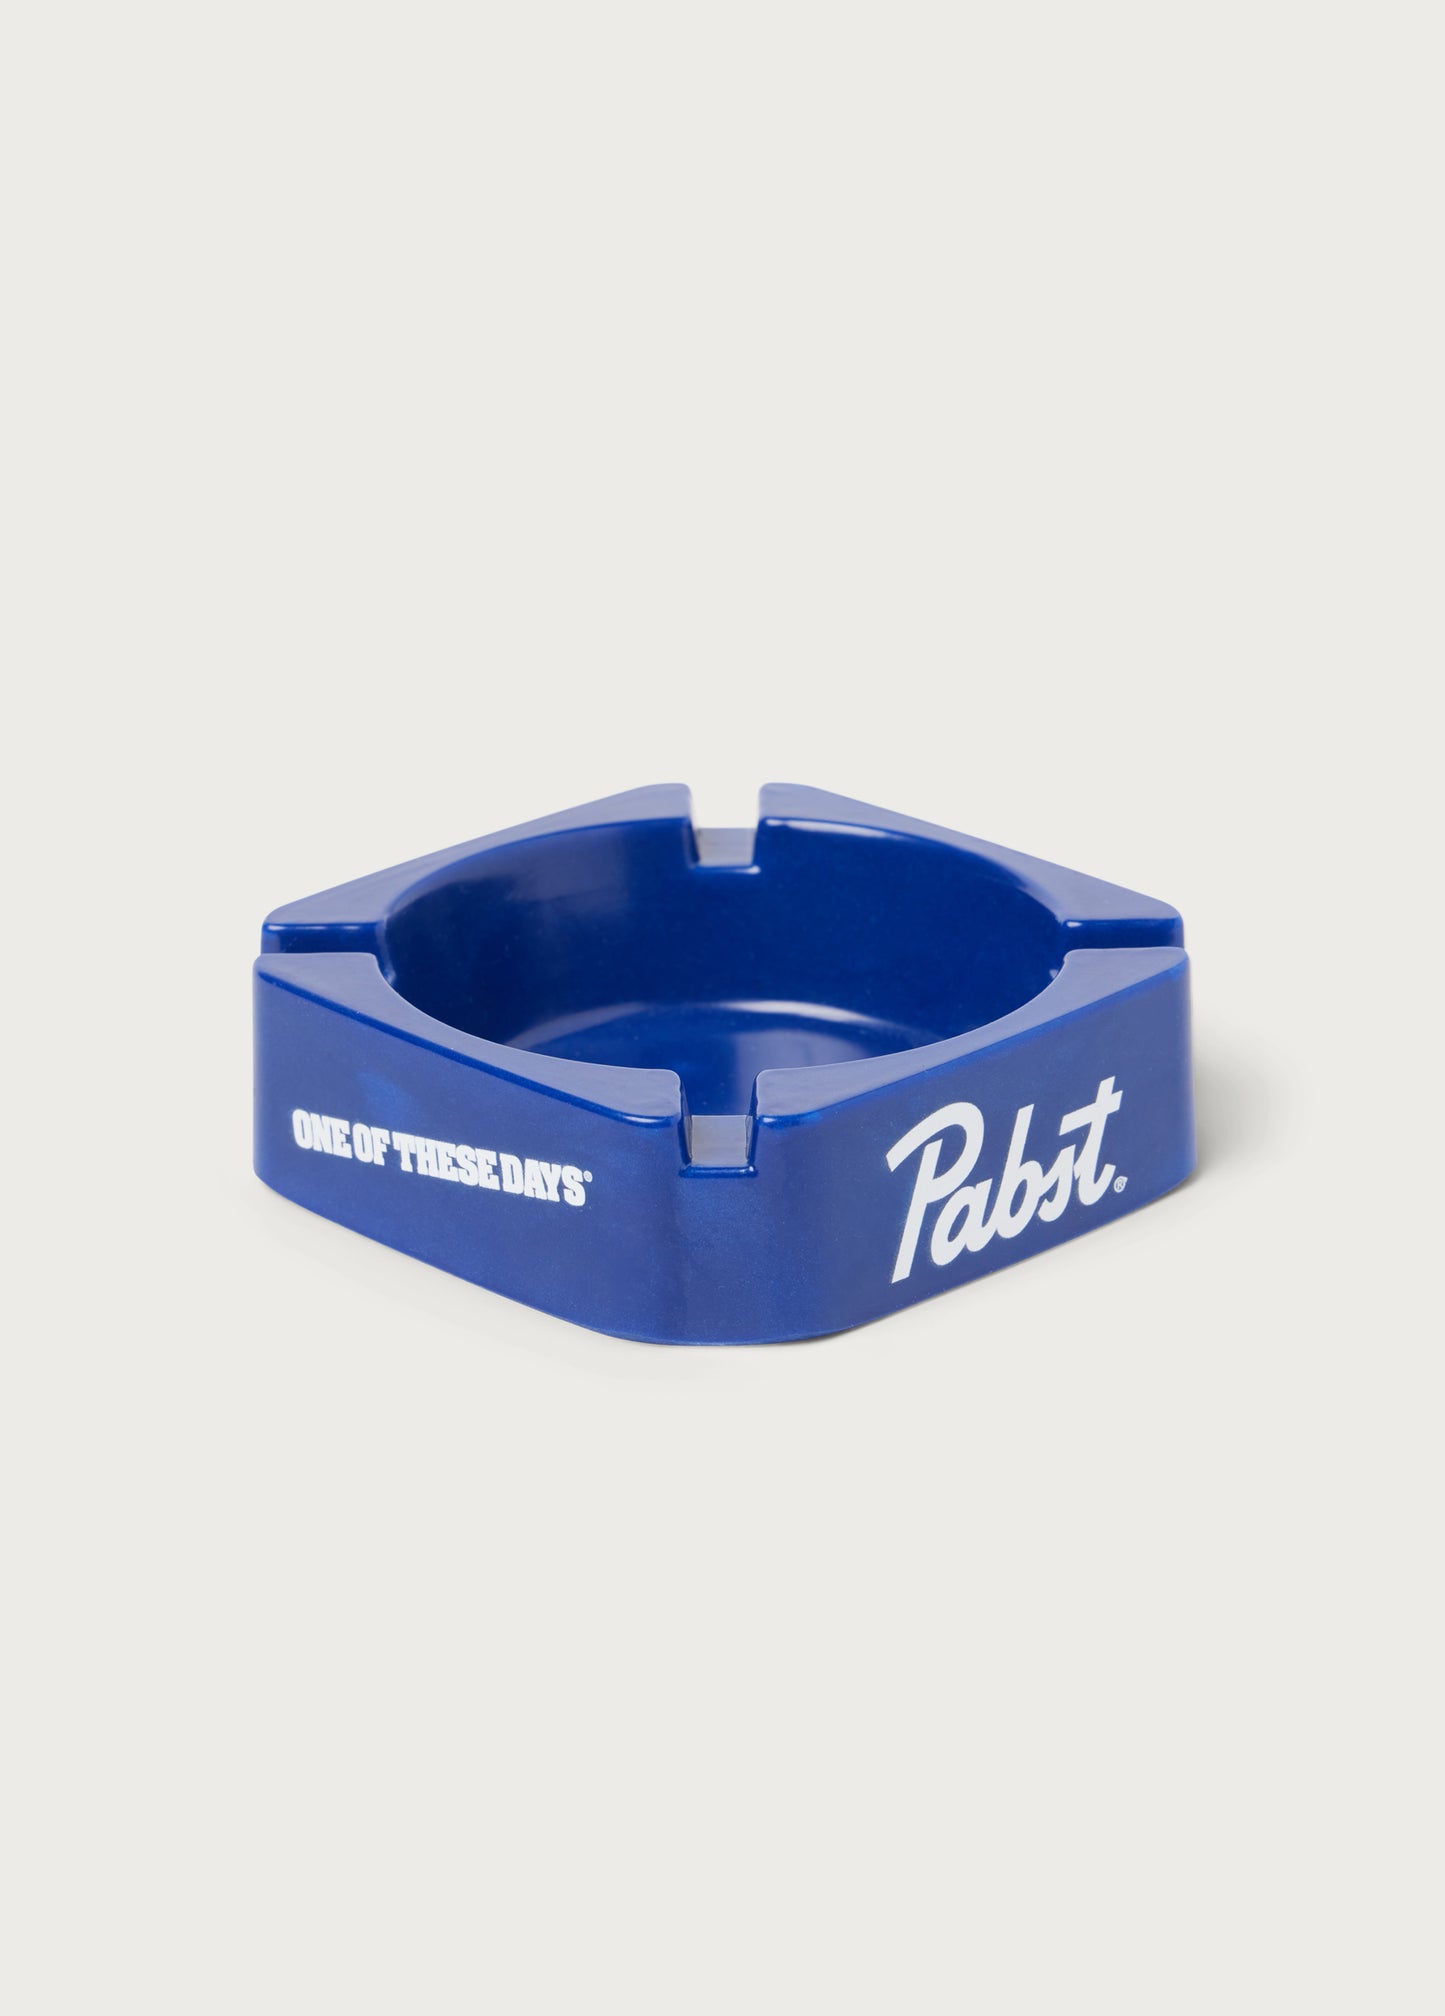 Pabst Lost Weekend Ashtray